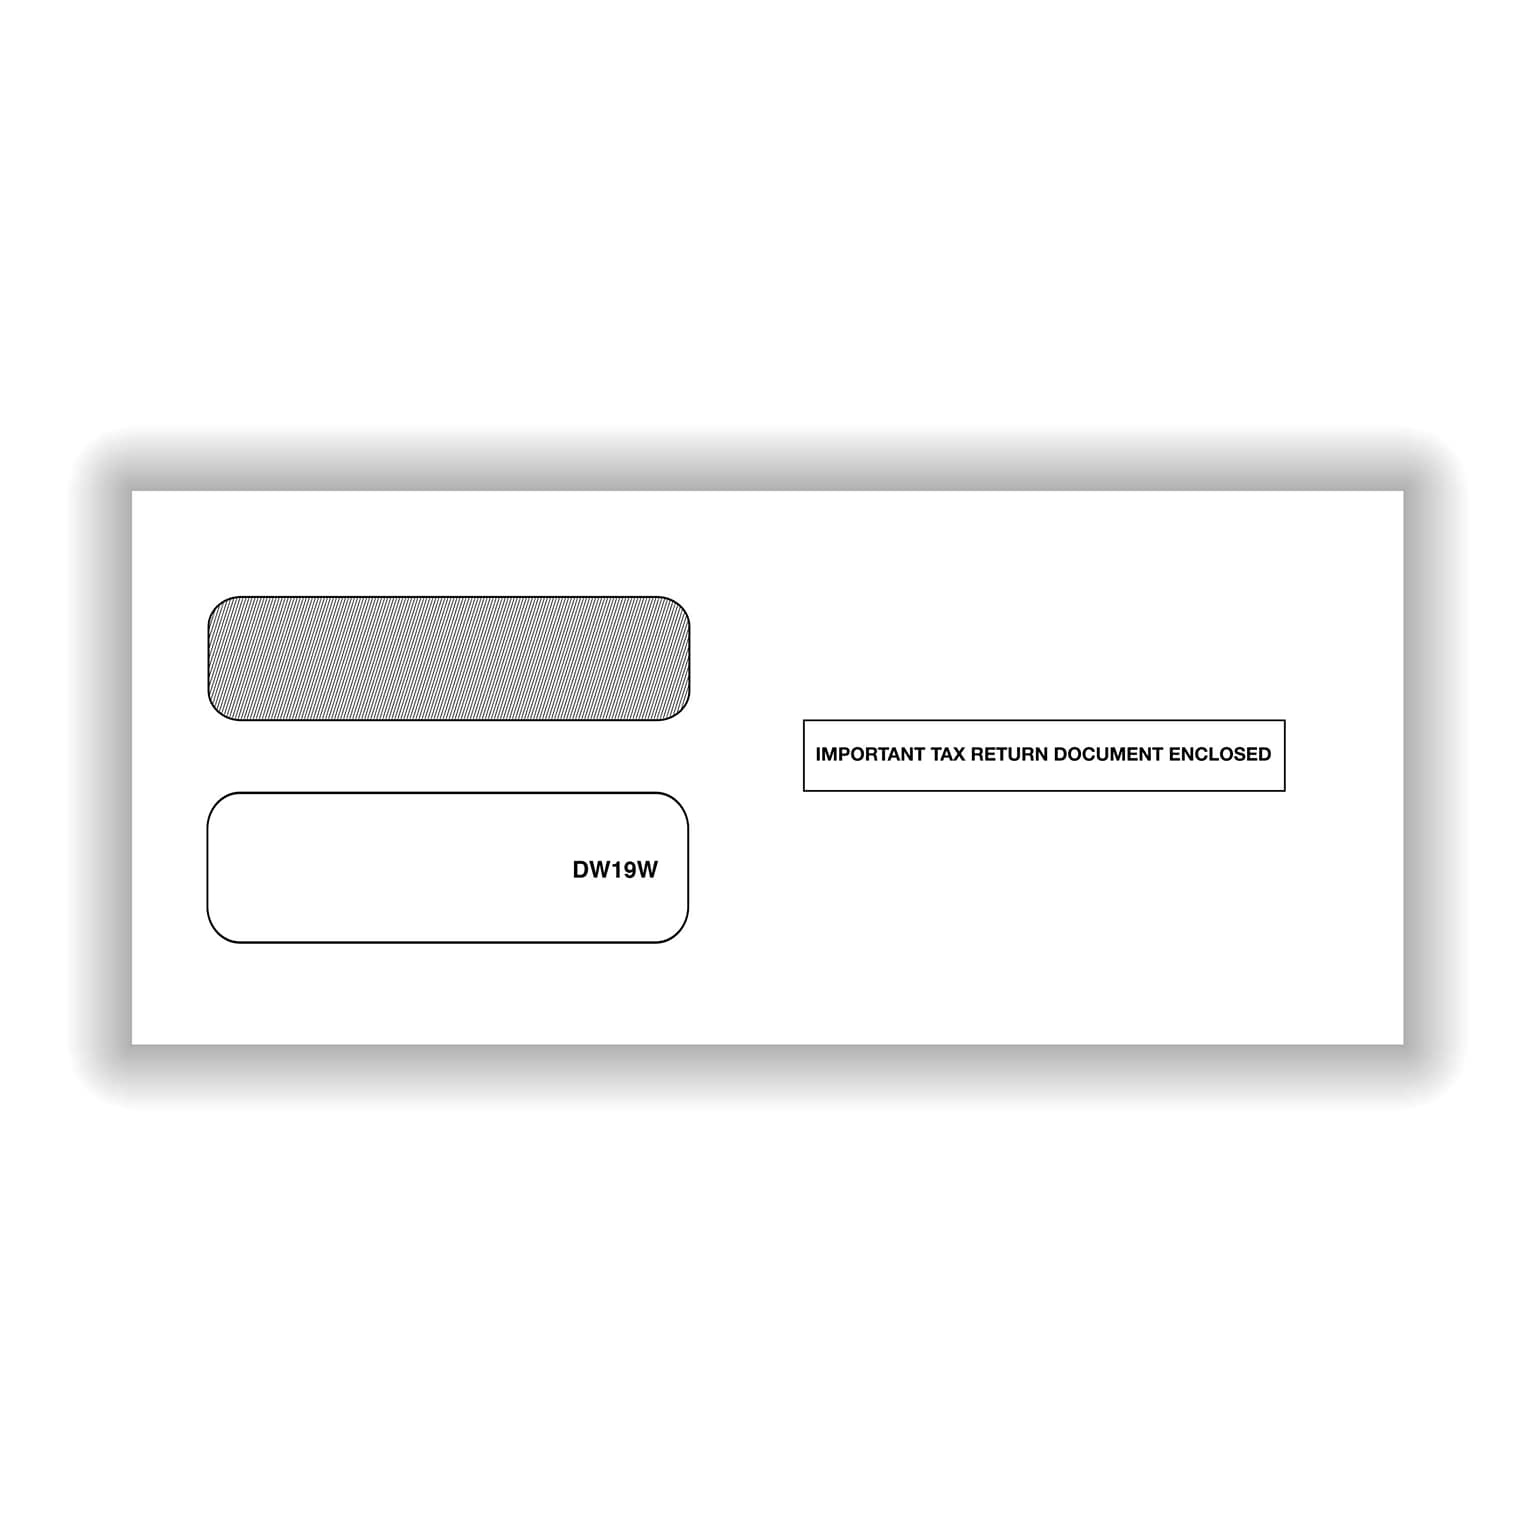 ComplyRight Moistenable Glue Security Tinted Double-Window Tax Envelopes, 3 7/8 x 8 3/8, 50/Pack (DW19W)